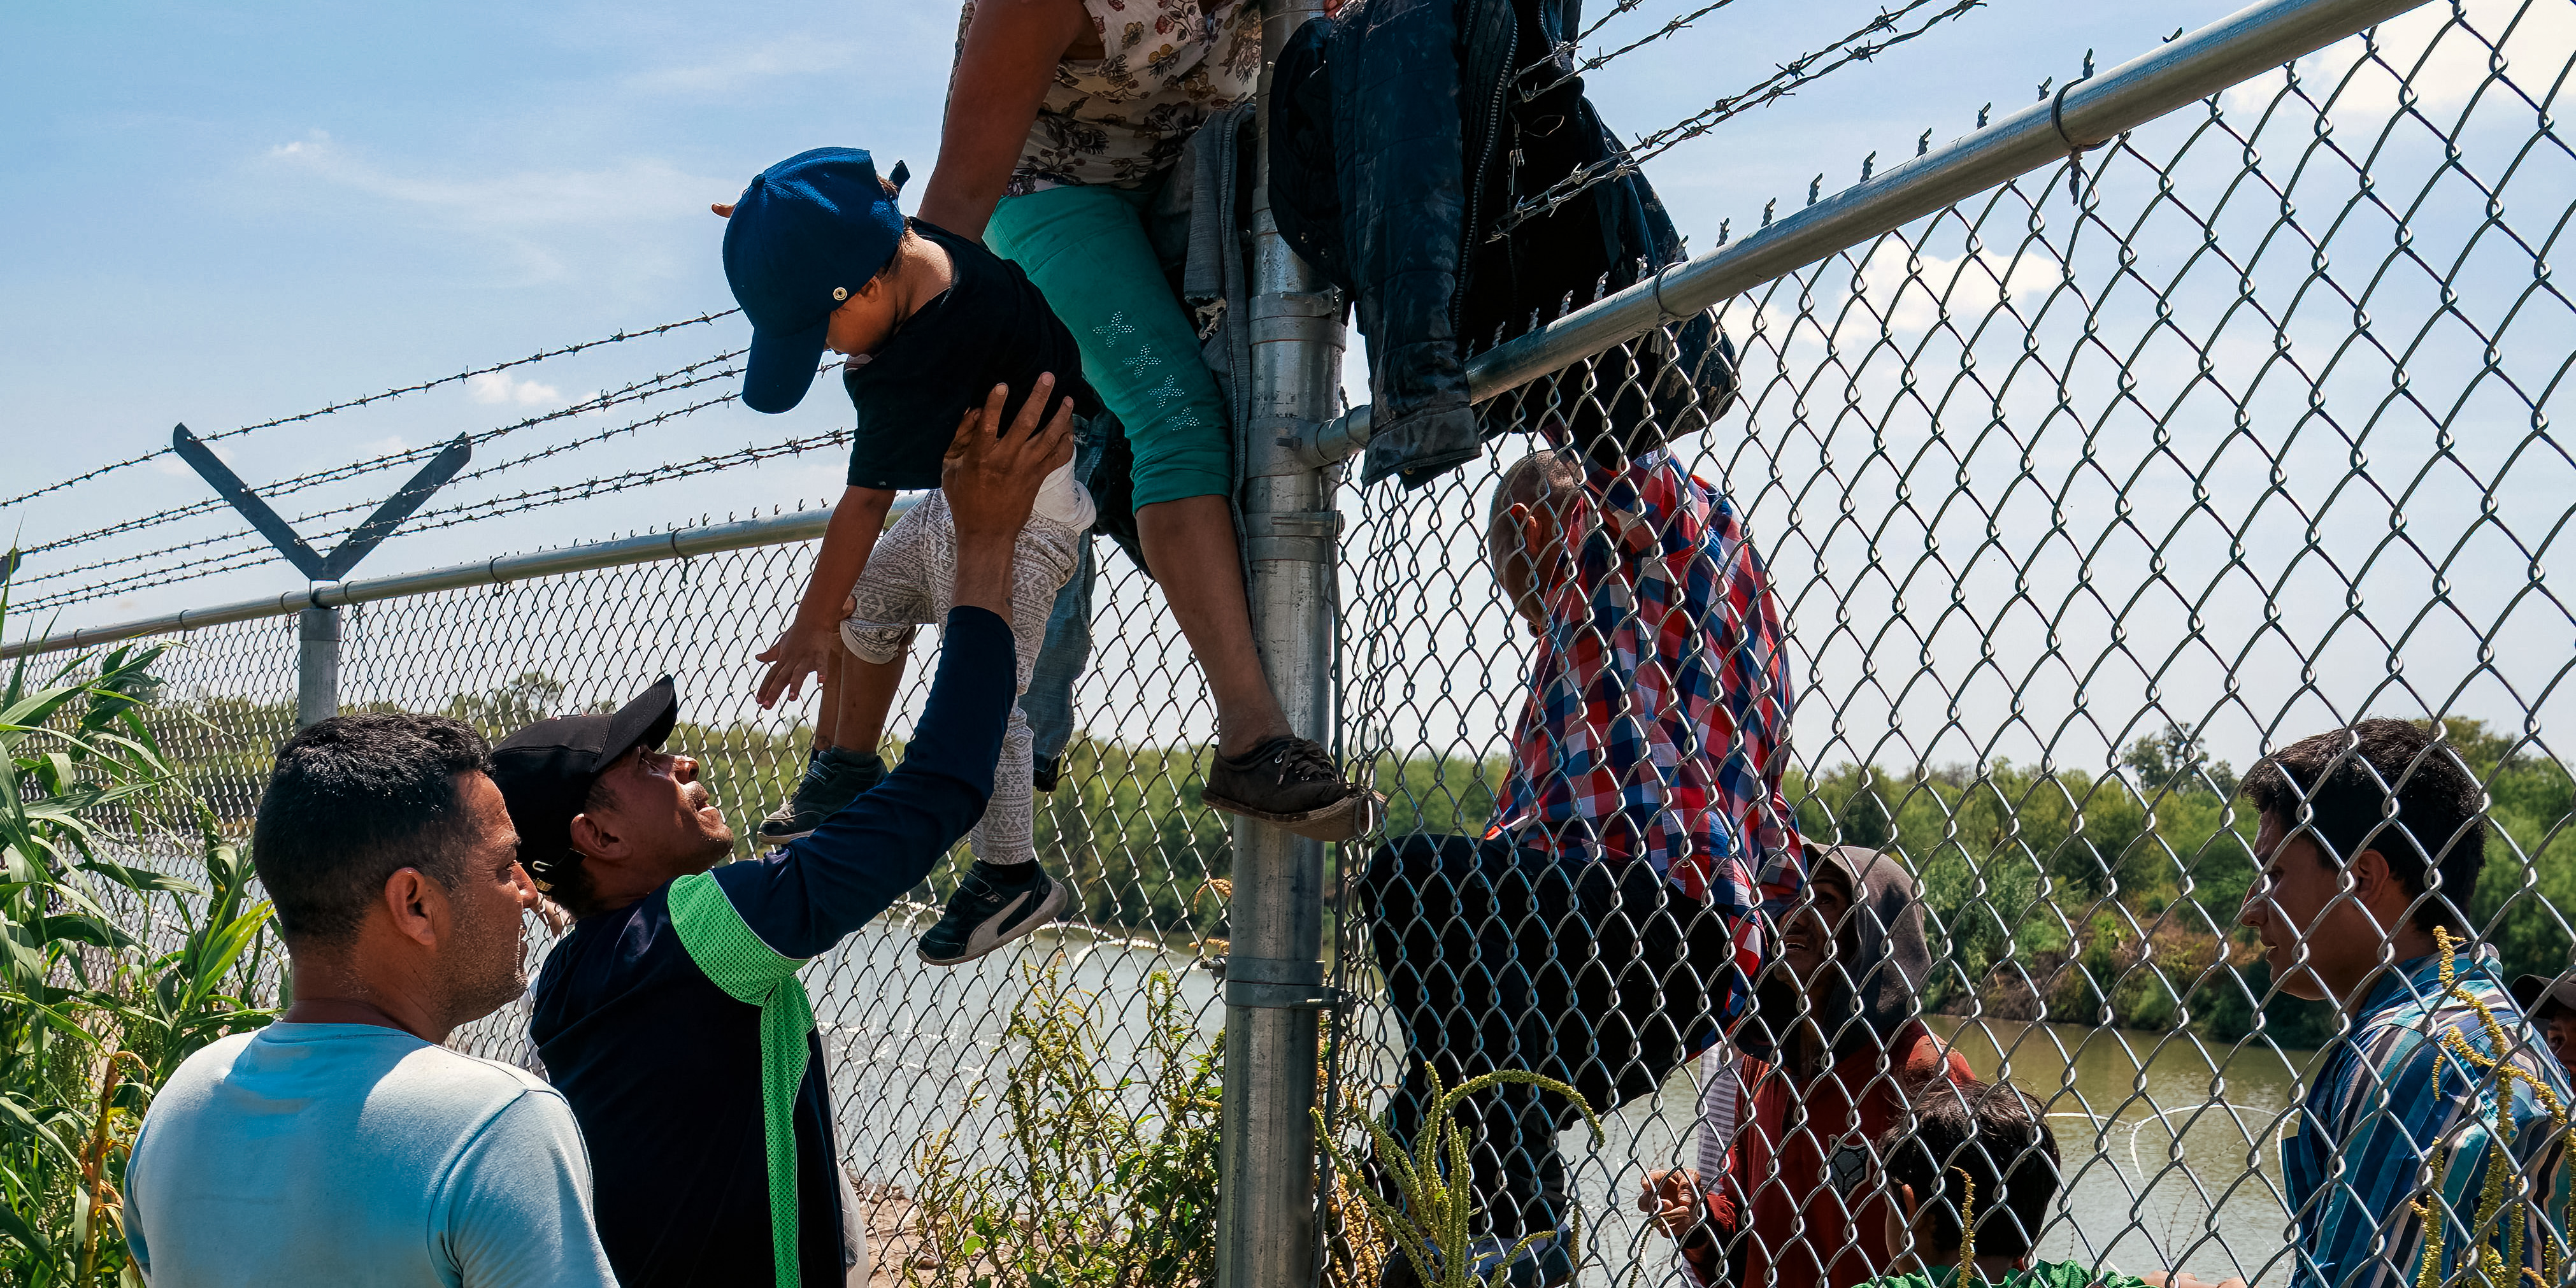 Migrants climb over a barbed wire fence after crossing the Rio Grande into US from Mexico, in Eagle Pass, Texas on August 25, 2023. (Photo by SUZANNE CORDEIRO / AFP) (Photo by SUZANNE CORDEIRO/AFP via Getty Images)